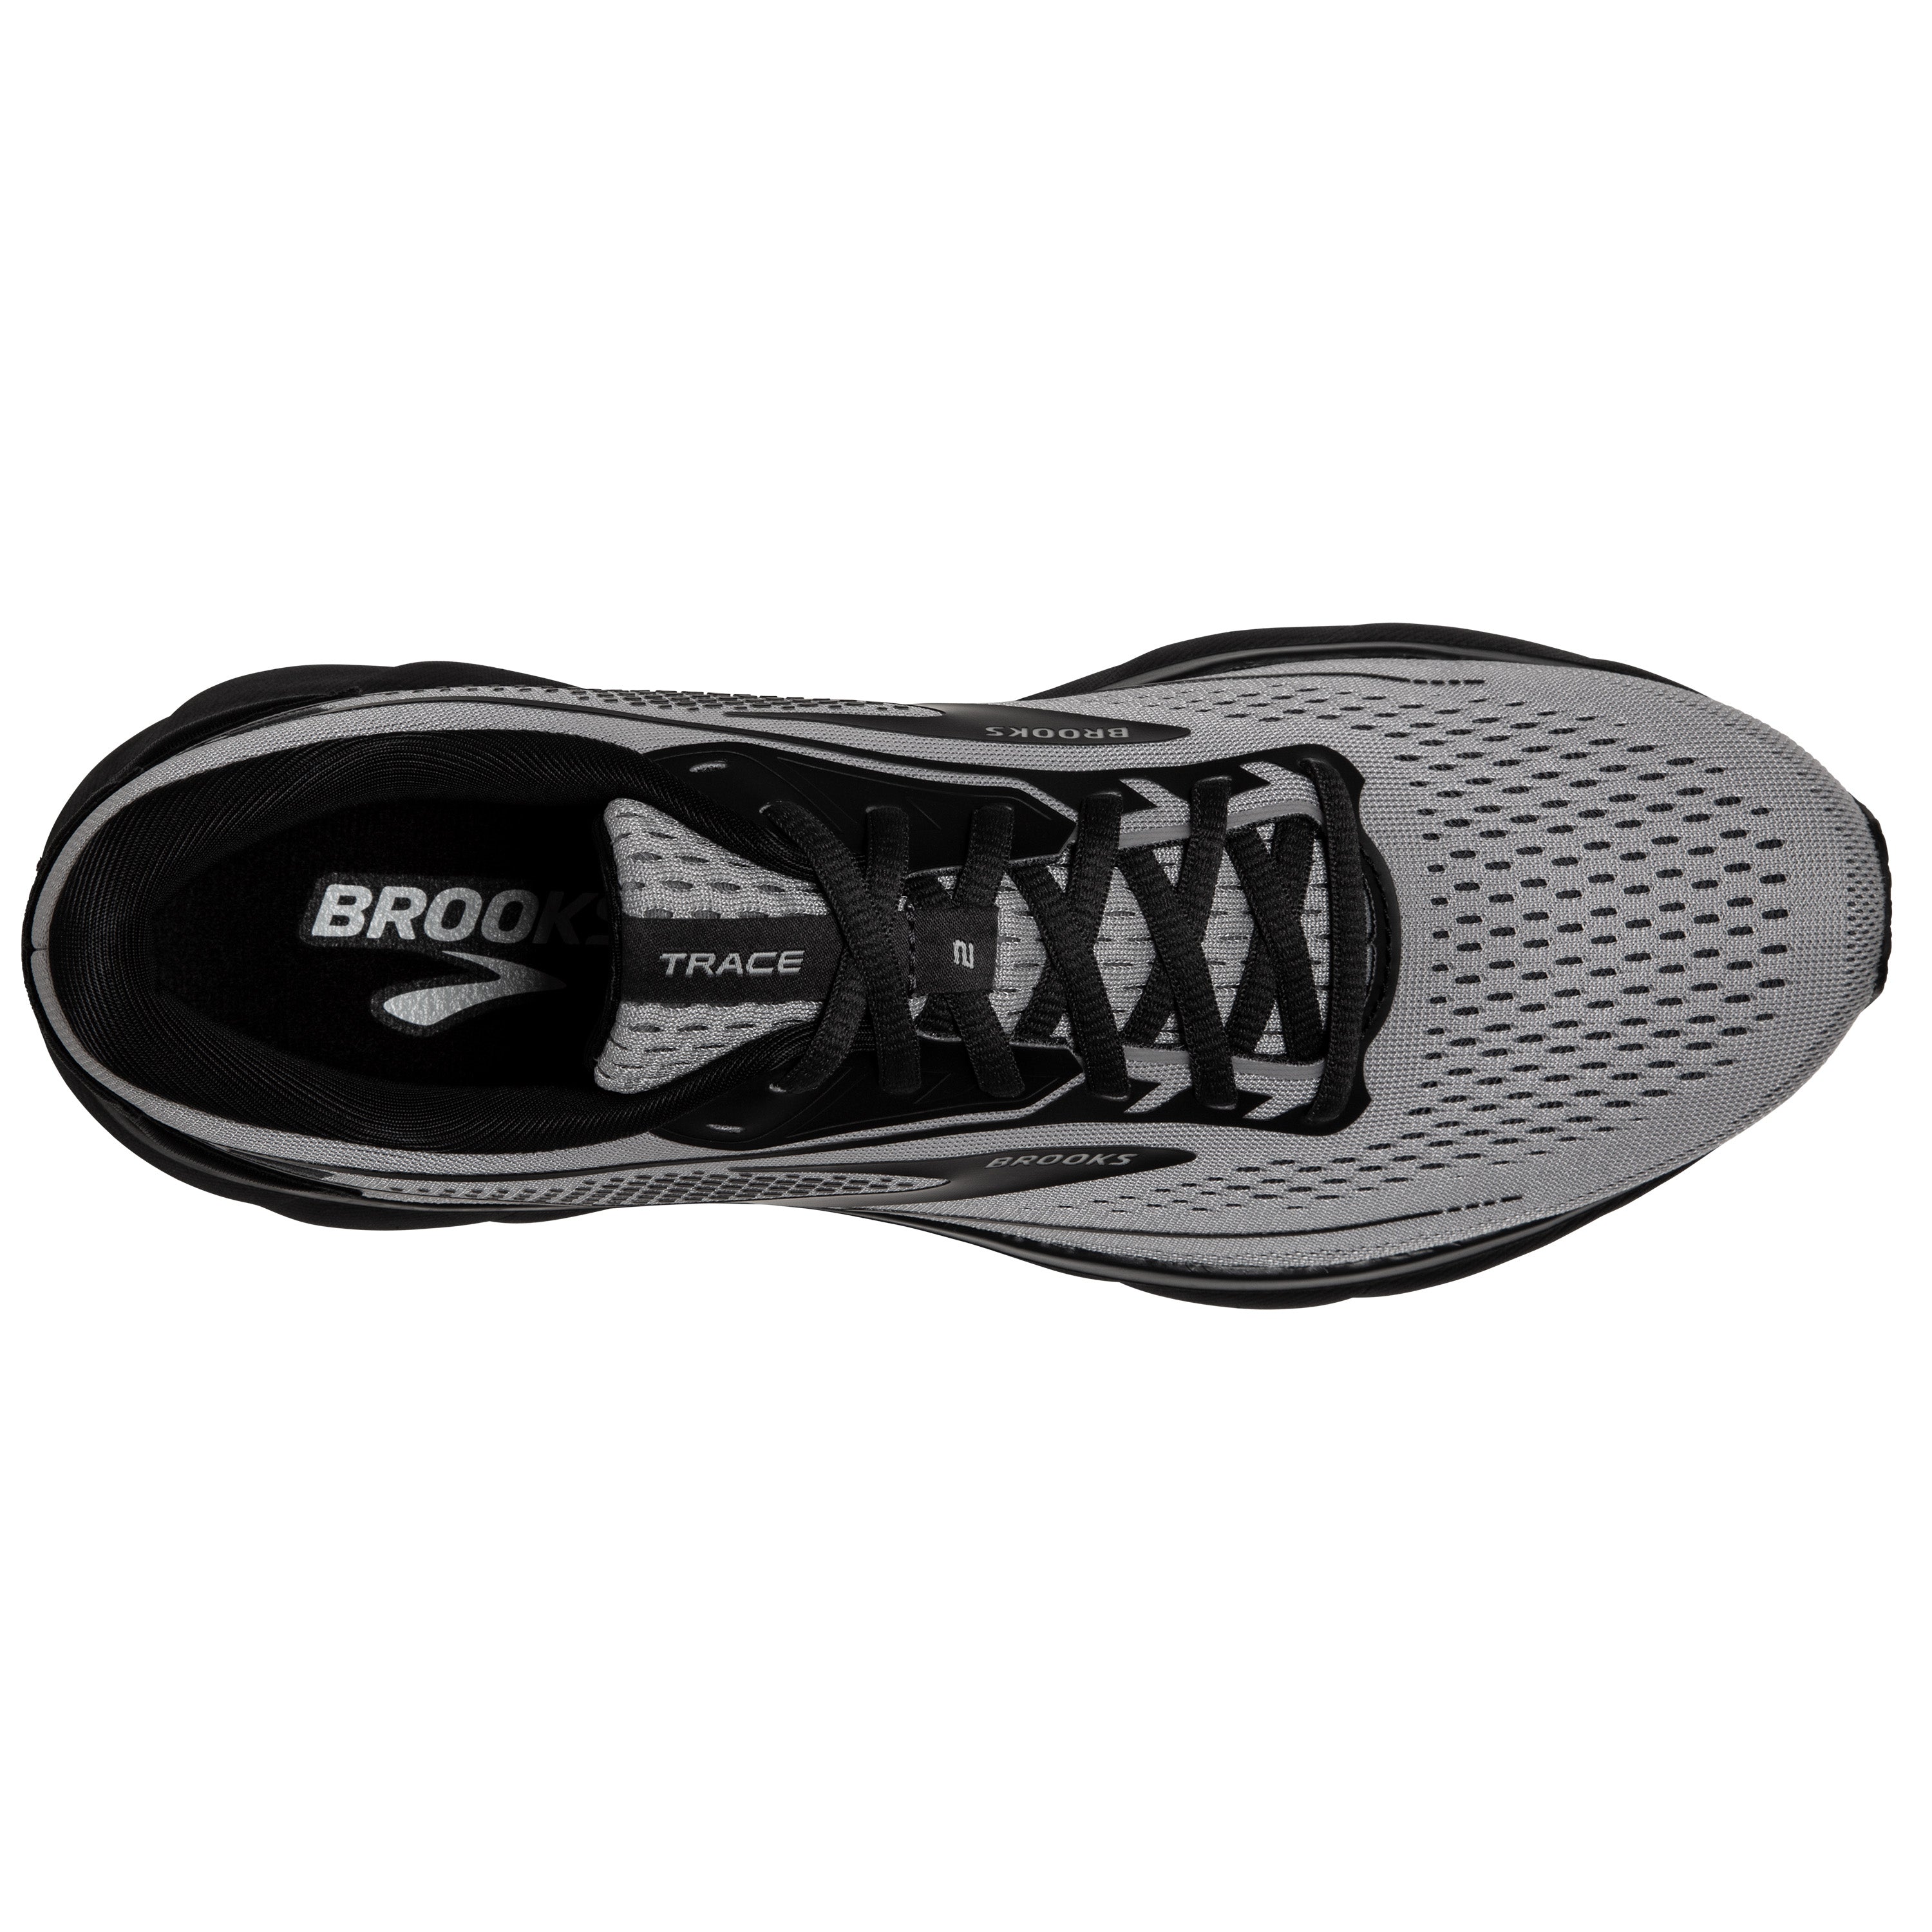 Trace 2 Men's Running Shoes